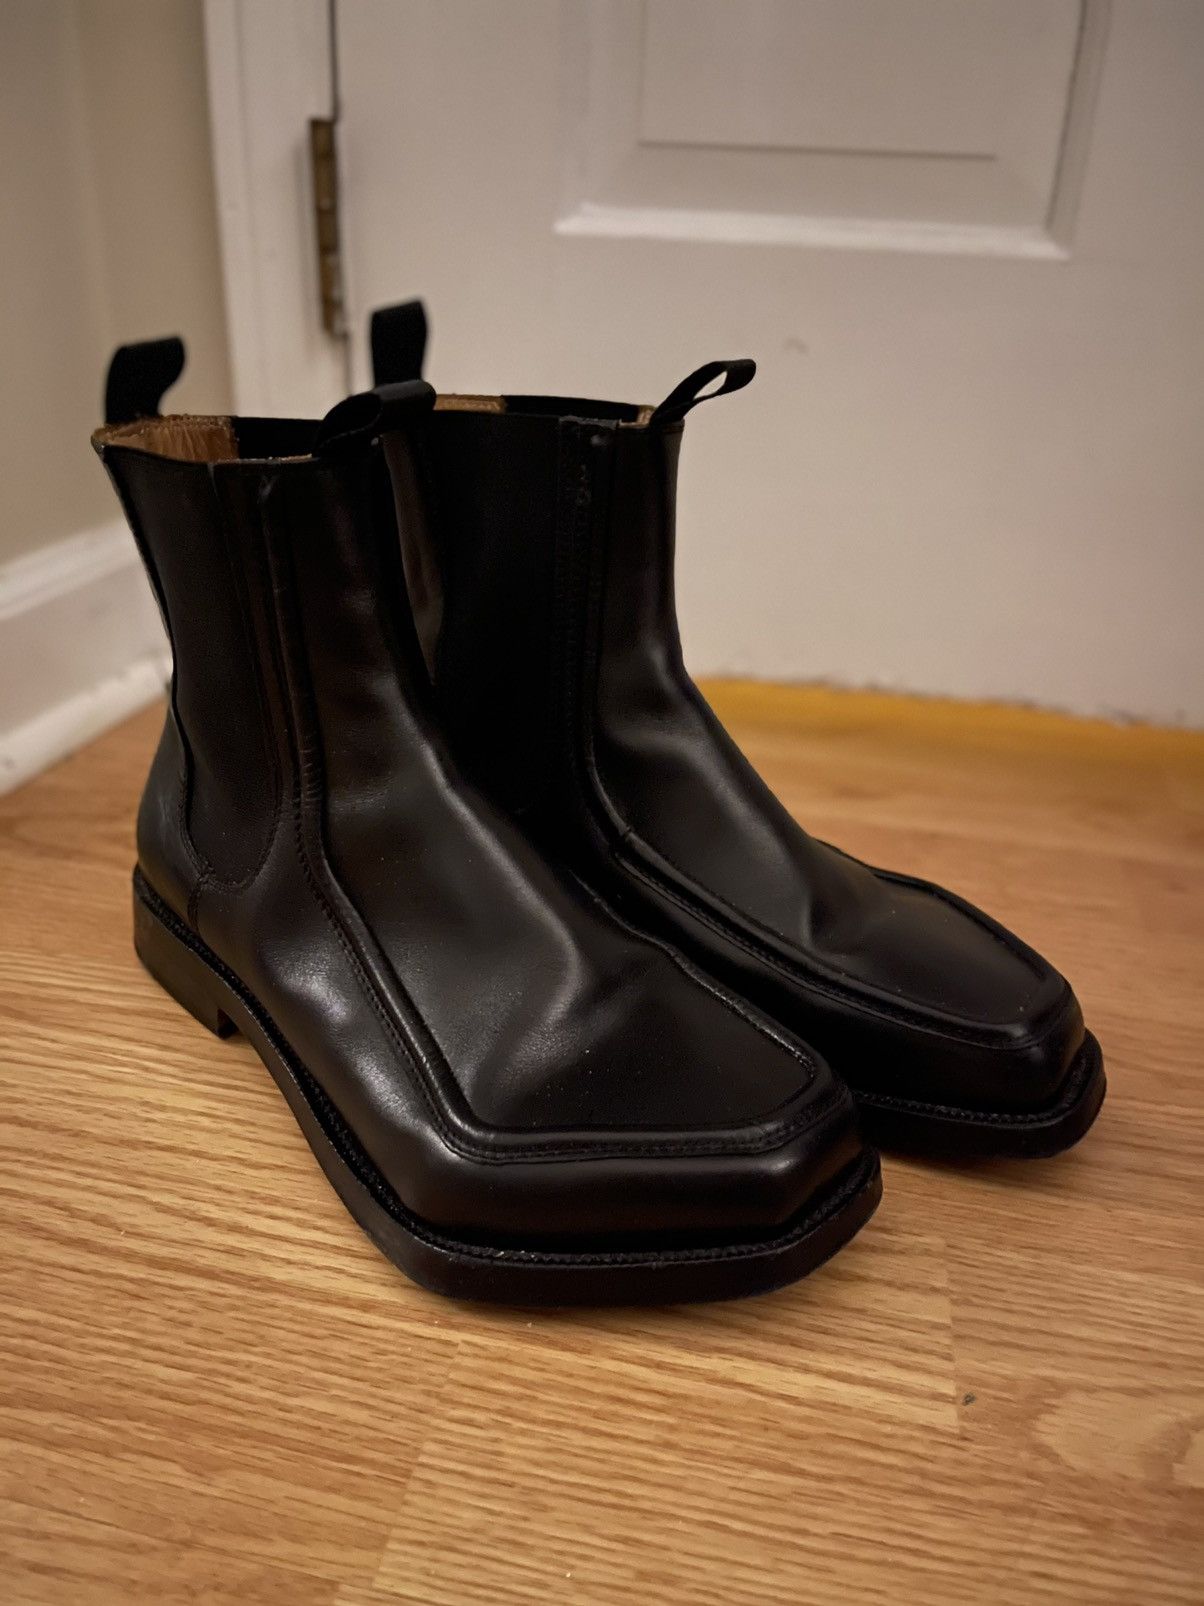 Other Magliano AW19 Monster Chelsea Boots | Grailed